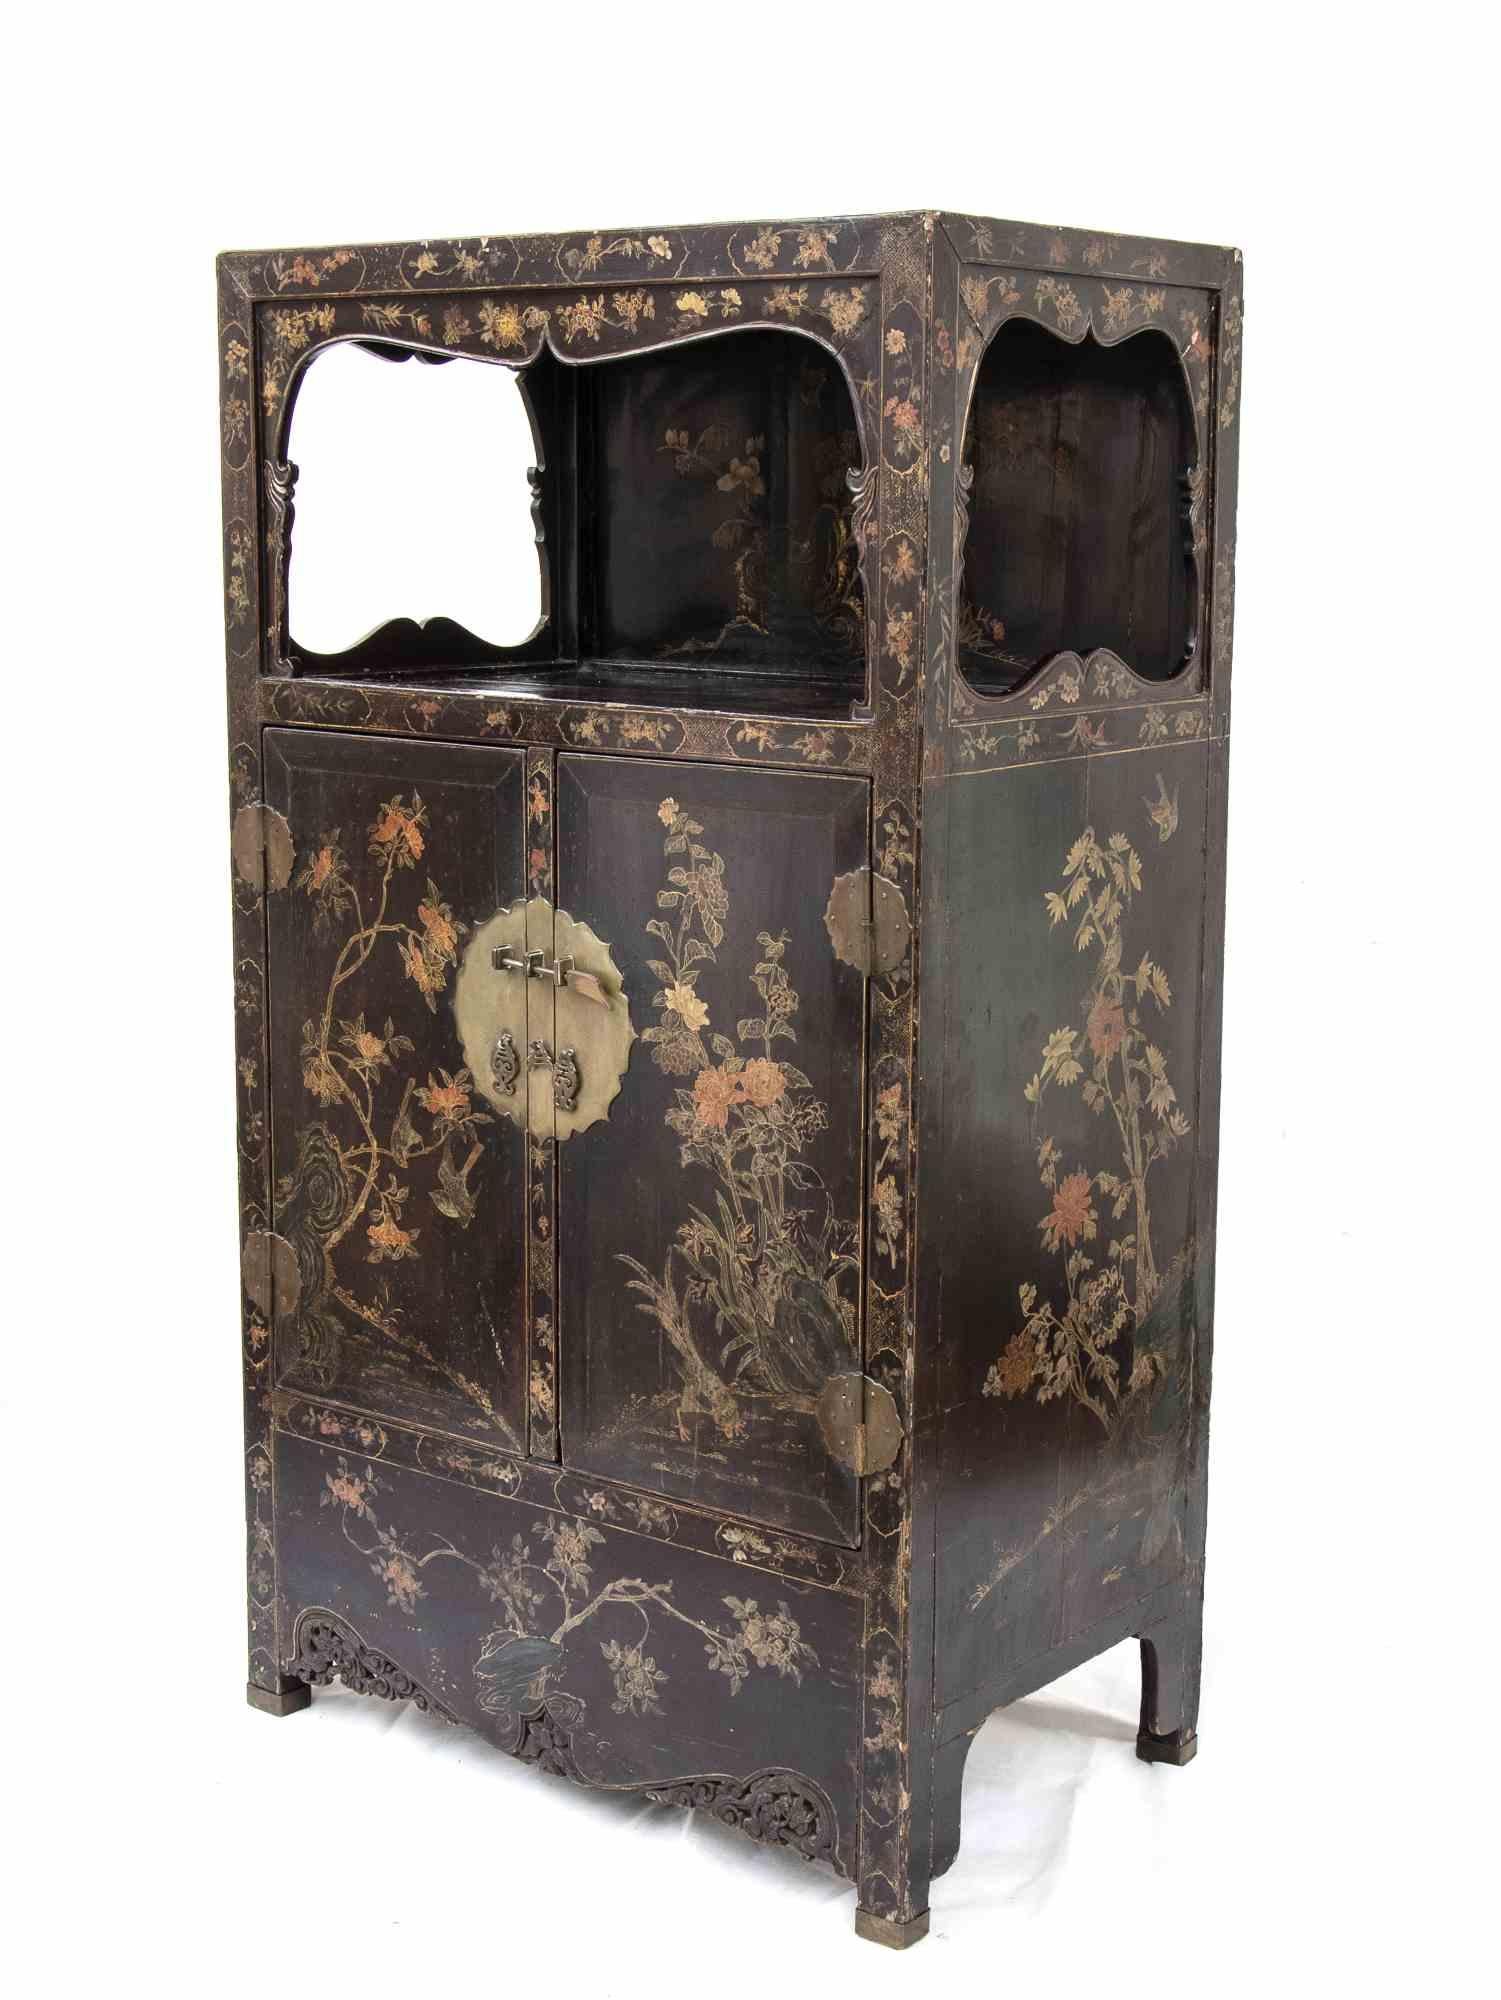 China, early 20th century.

Rectangular section, the lower area with a compartment with two doors with metal hinges, the upper section with open compartment with a wavy profile frame, the entire external surface freely decorated in polychromy on a